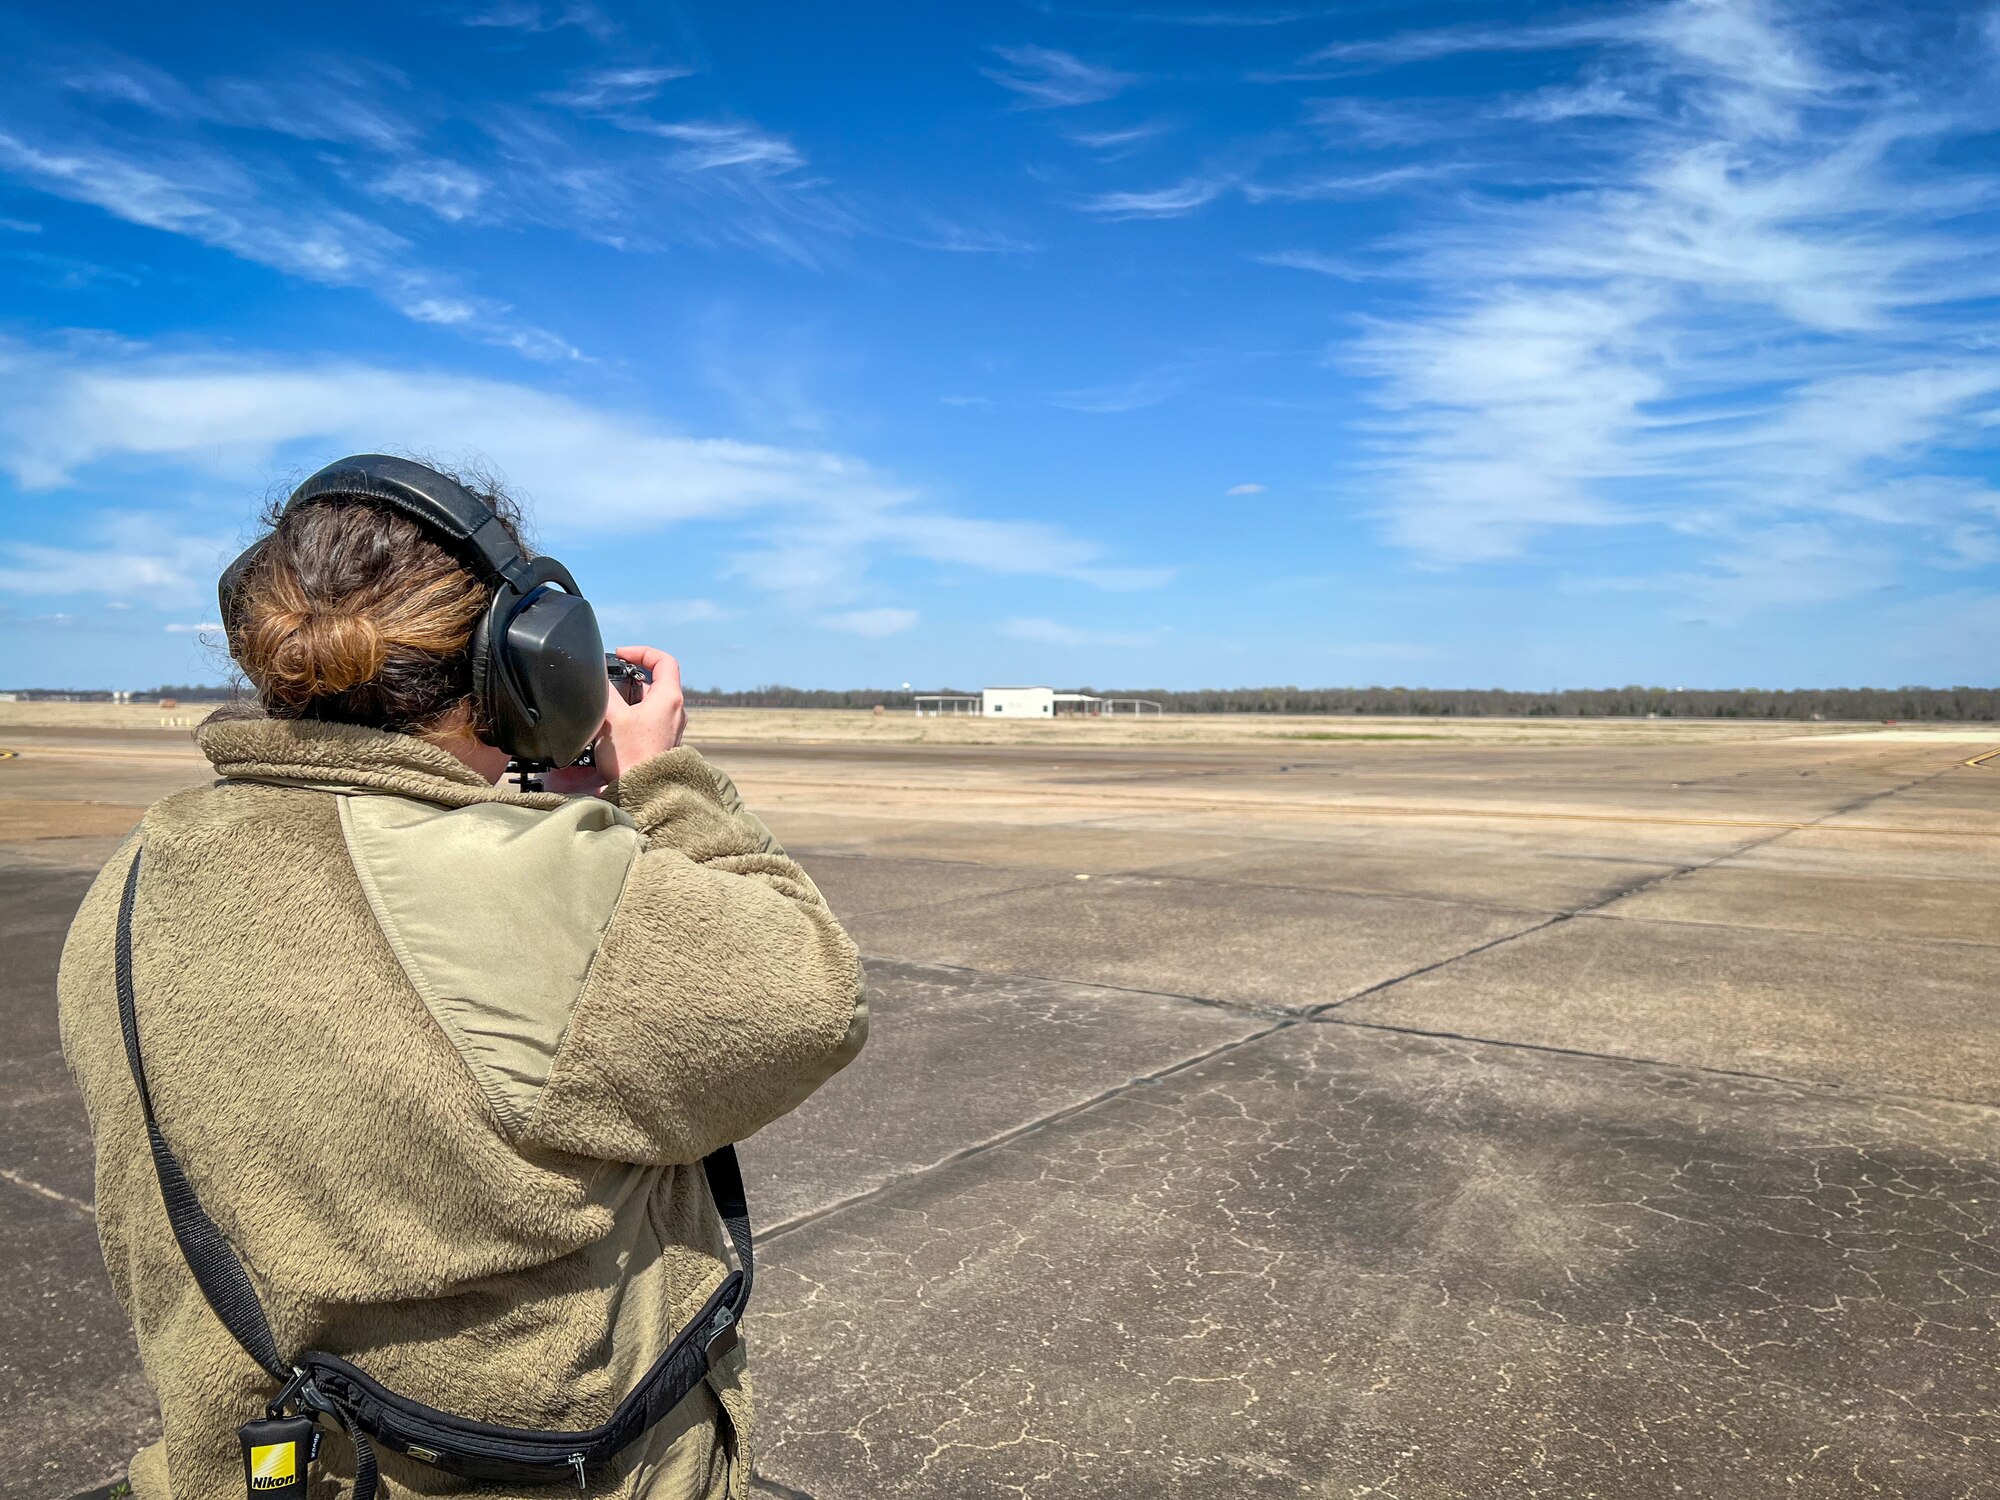 Staff. Sgt. Tambri Cason, 307th Bomb Wing Public Affairs Specialist, shoots video on the flightline as at Barksdale Air Force Base, Louisiana on March 9, 2022. Cason participated in joint public affairs training that involved logistics, such as coordination of collecting imagery or footage for a a project and ensuring proper safety practices on the flightline are followed.